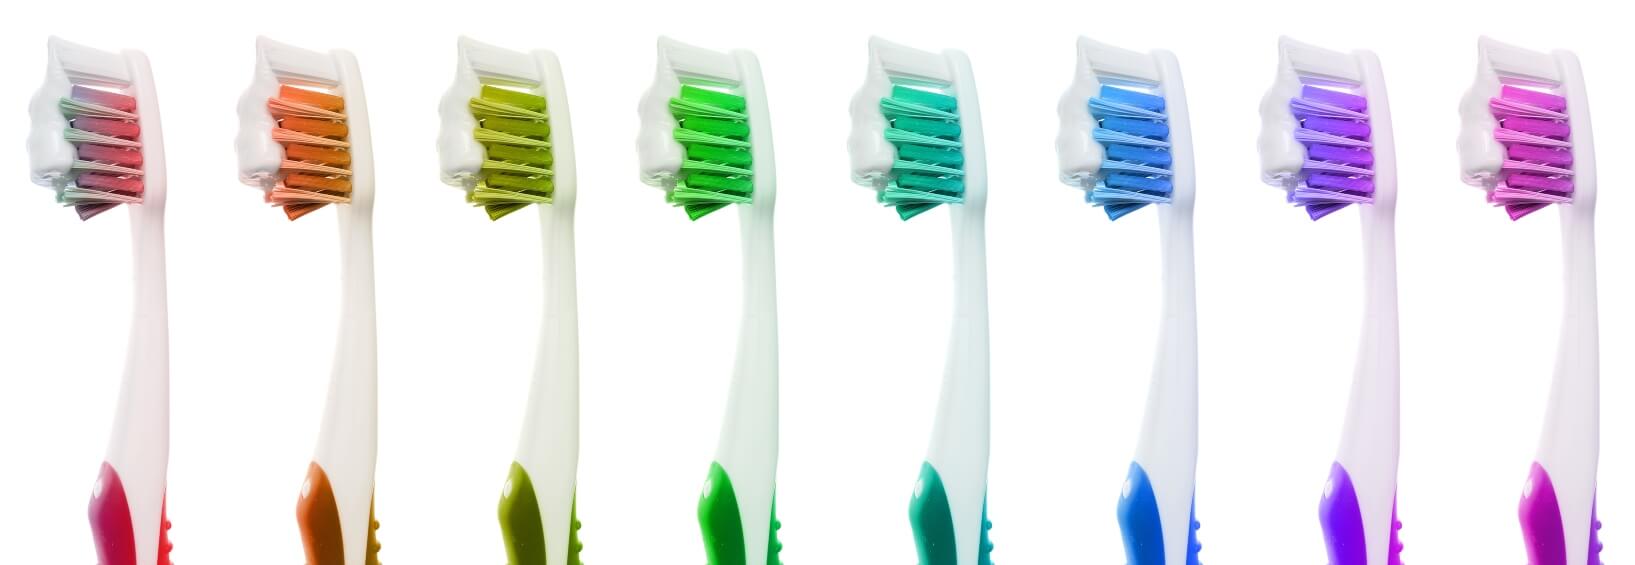 8 toothbrushes with toothpaste - rainbow colors